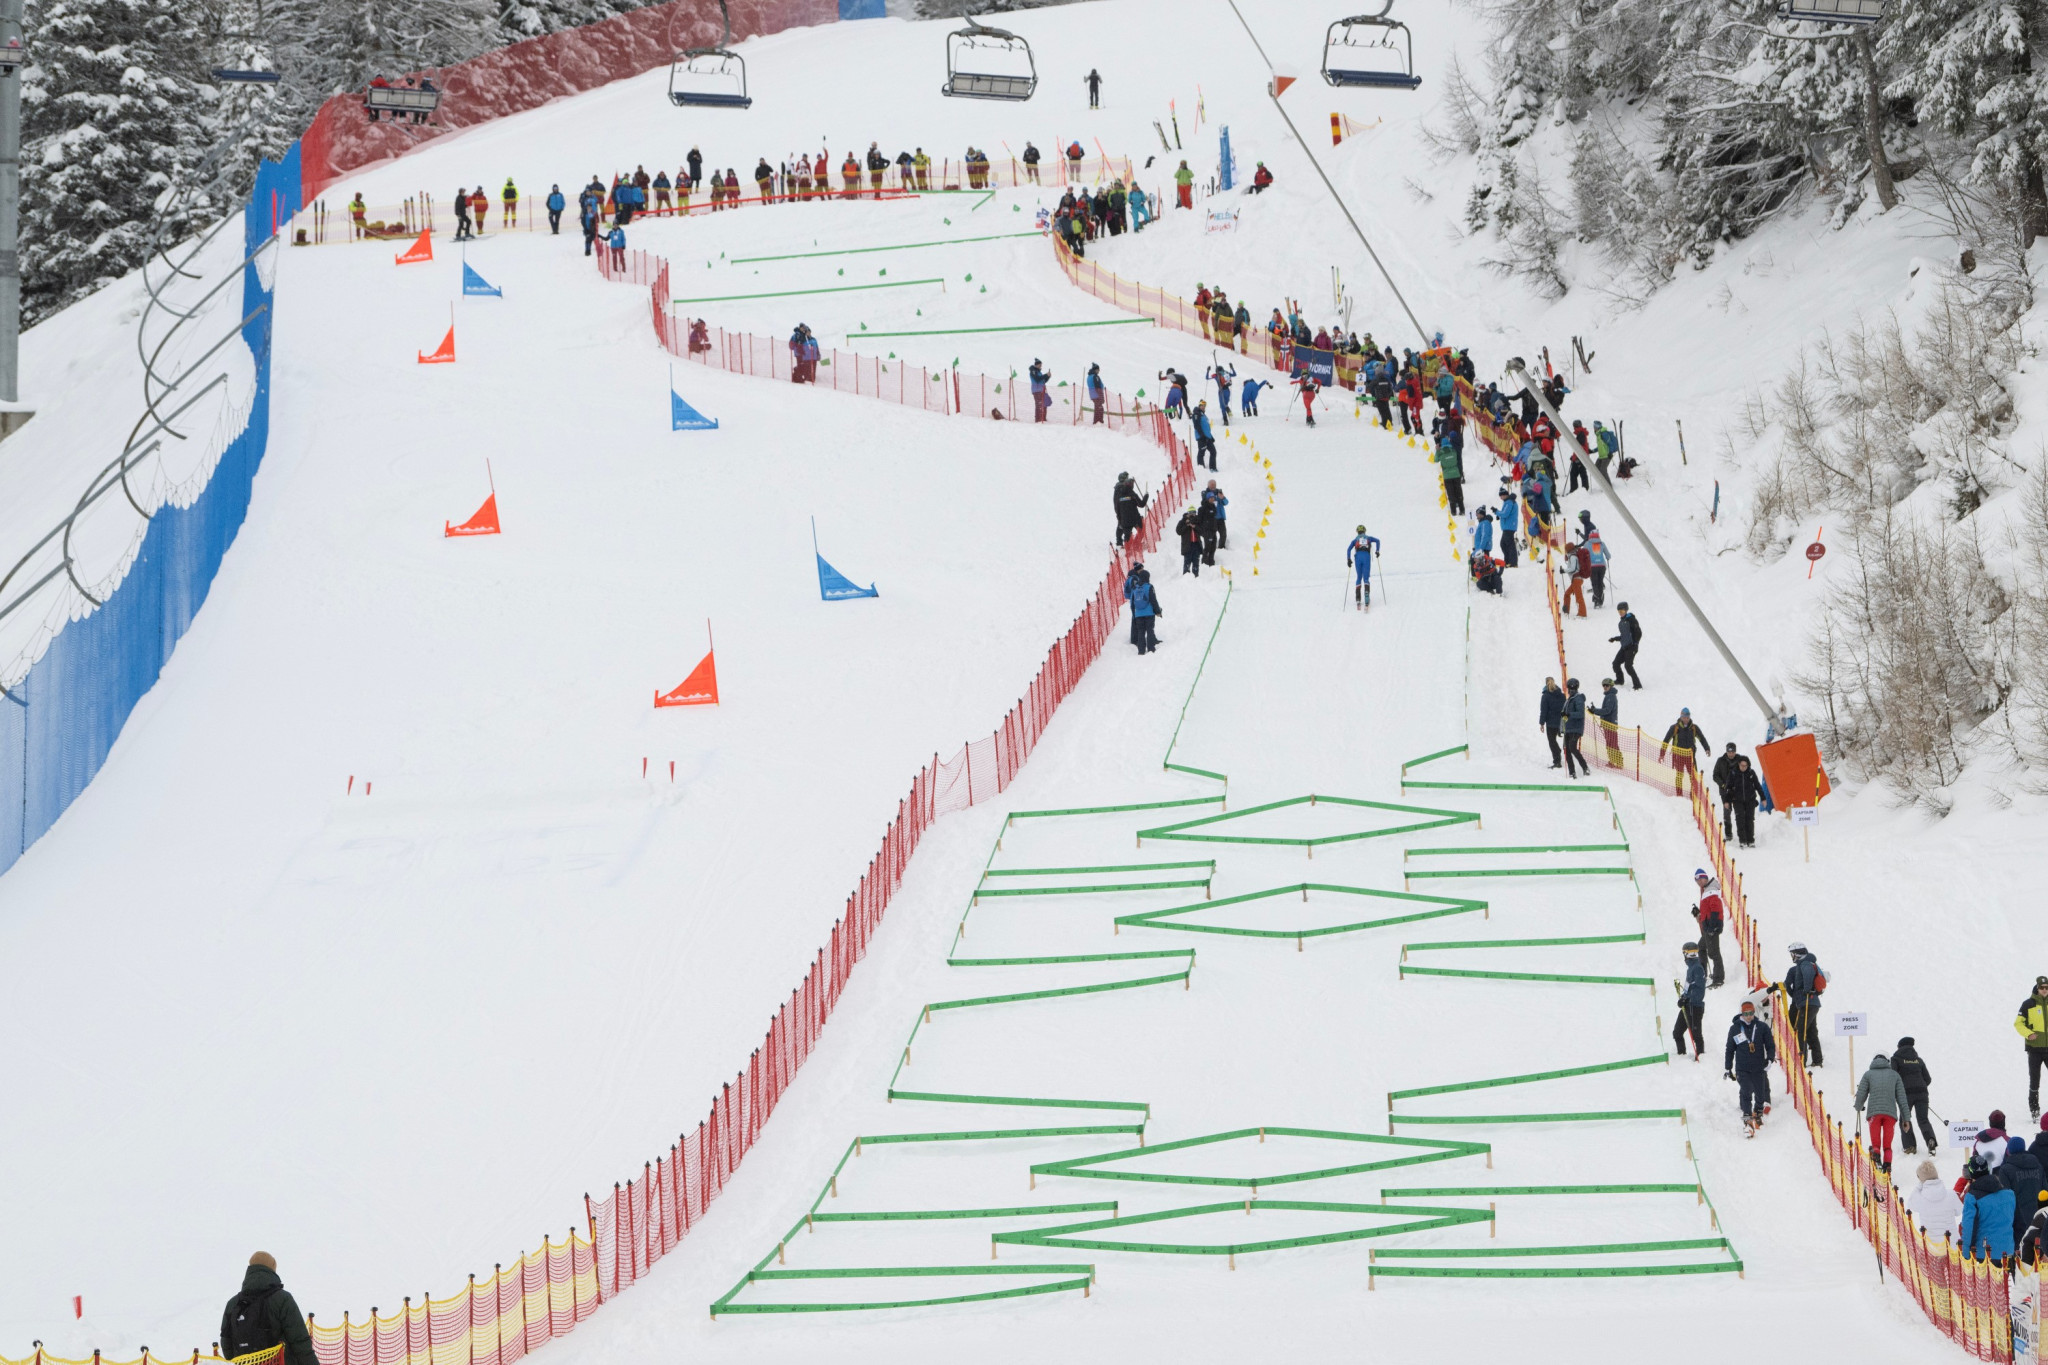 Ski mountaineering made its EYOF debut with medals won in girls and boys sprint events ©EYOF FVG 2023